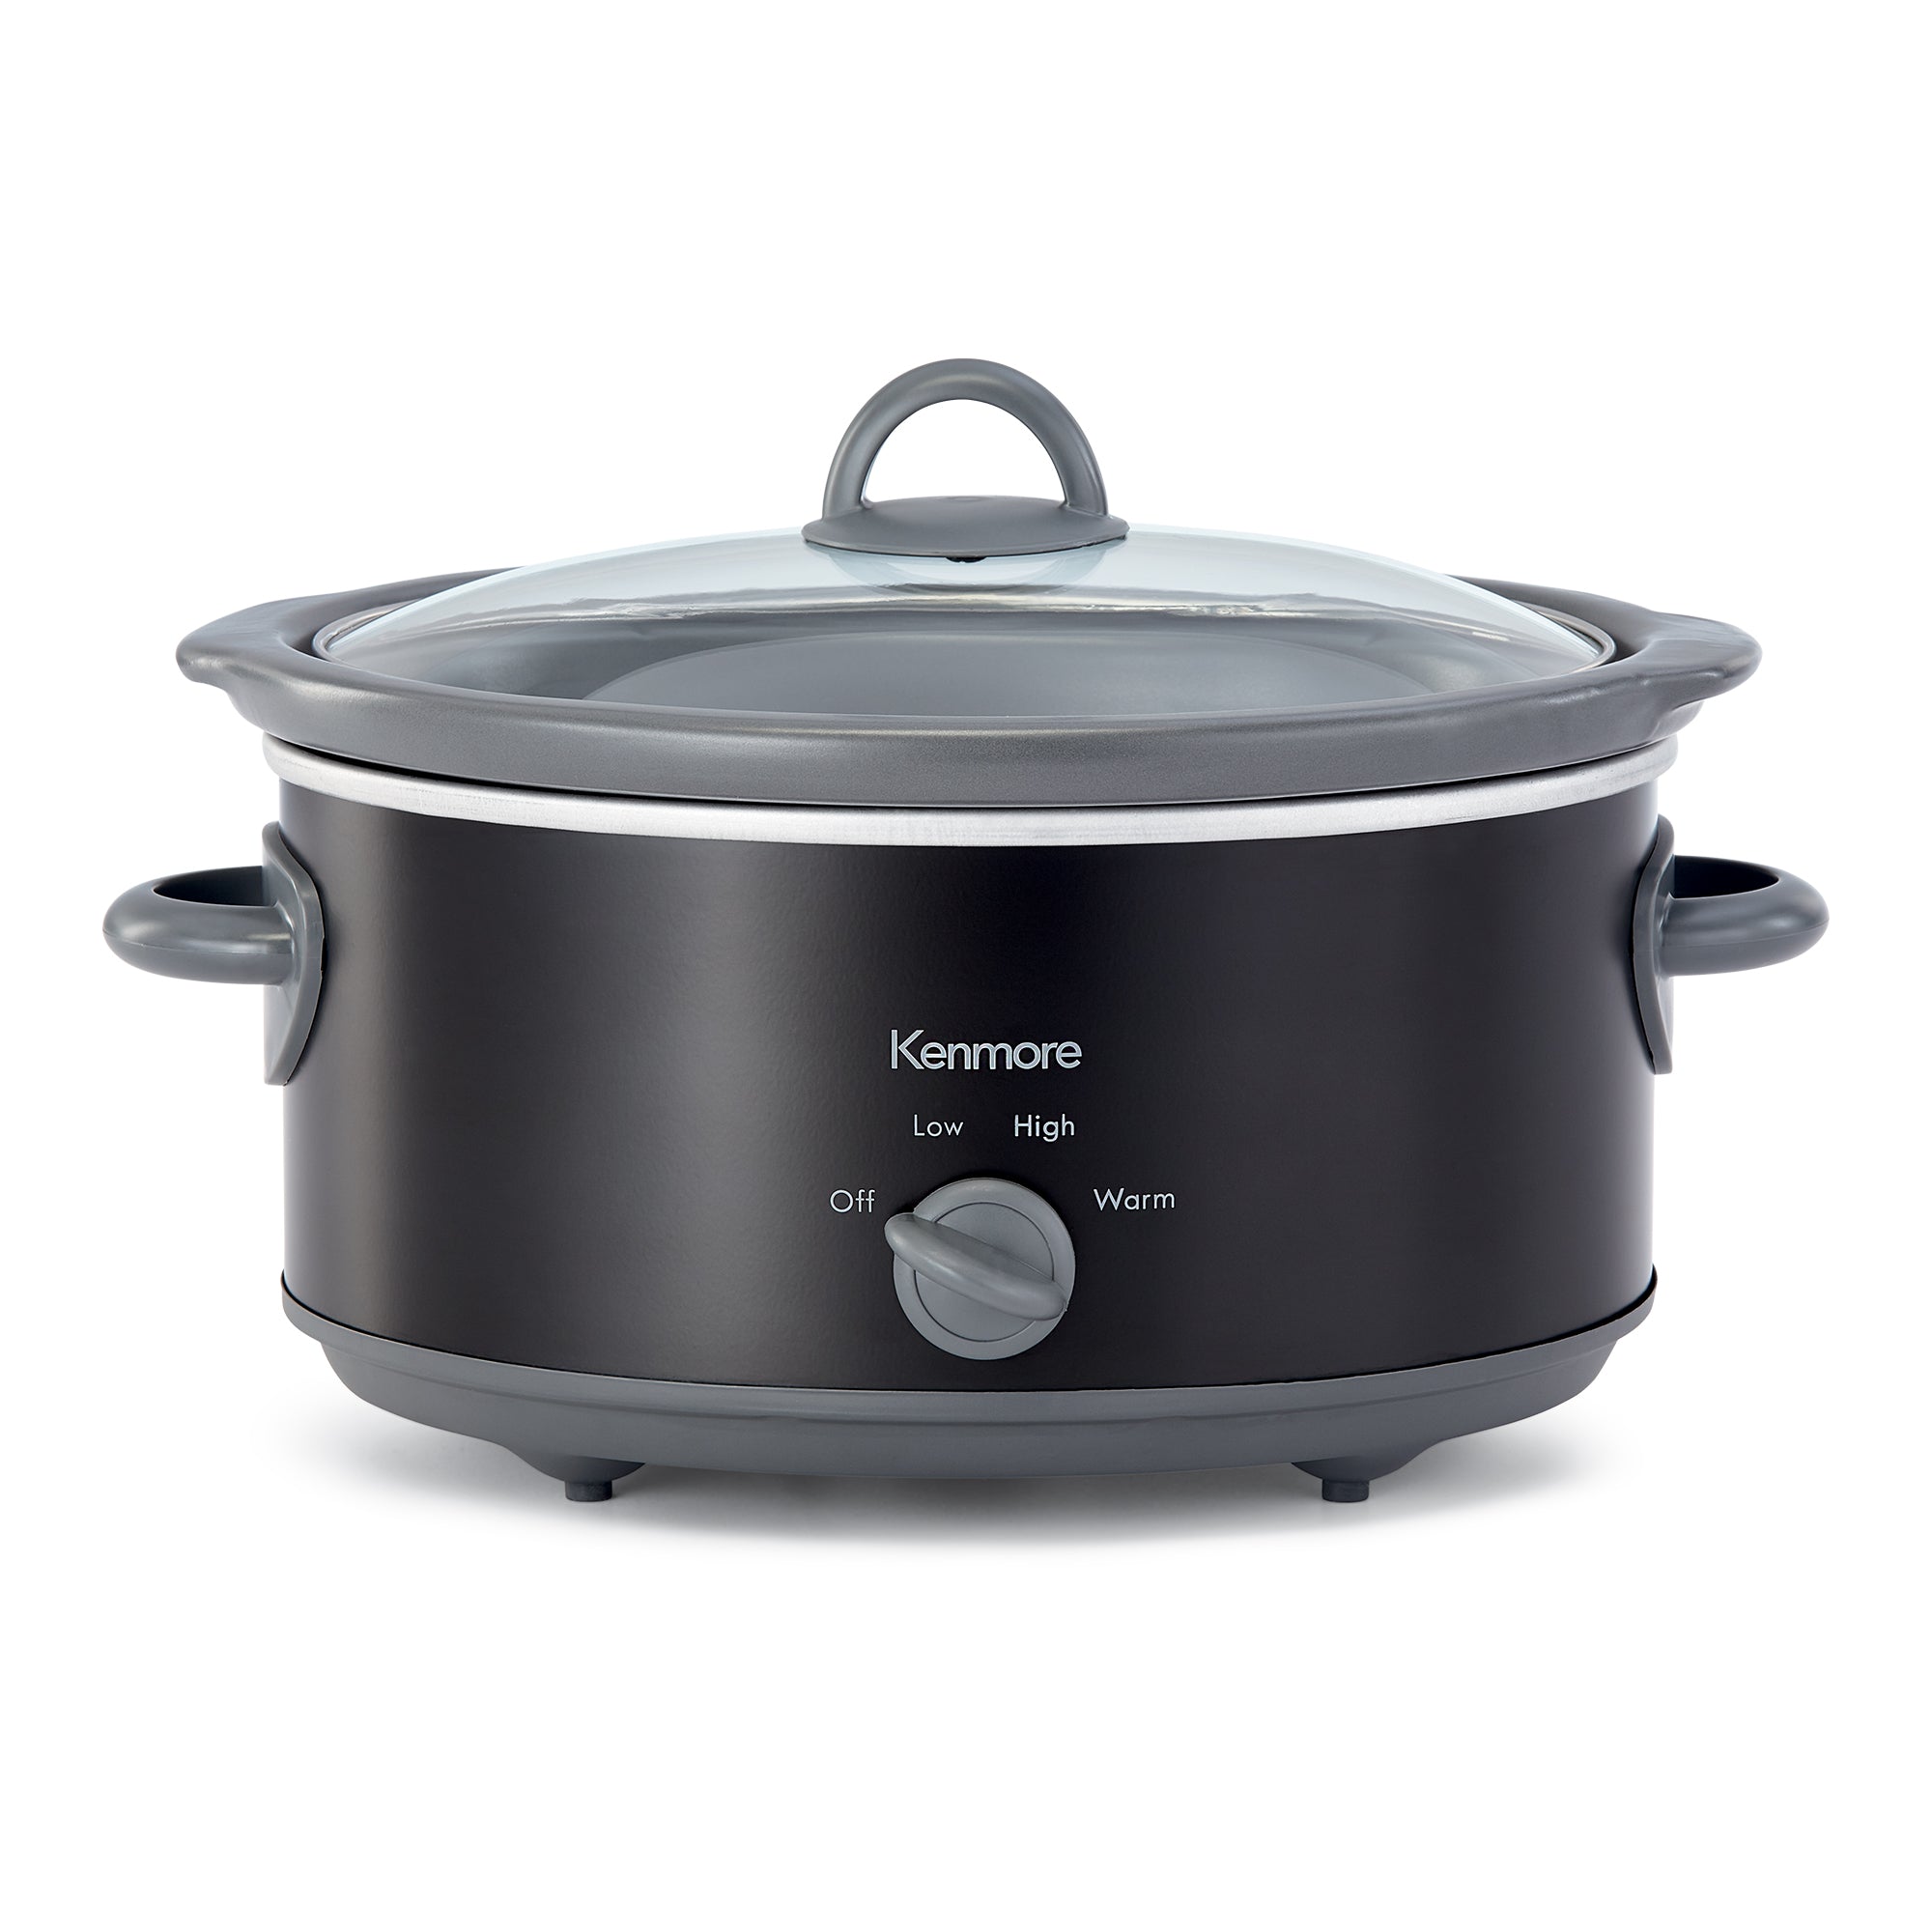 Kenmore 5 quart black slow cooker on a white background